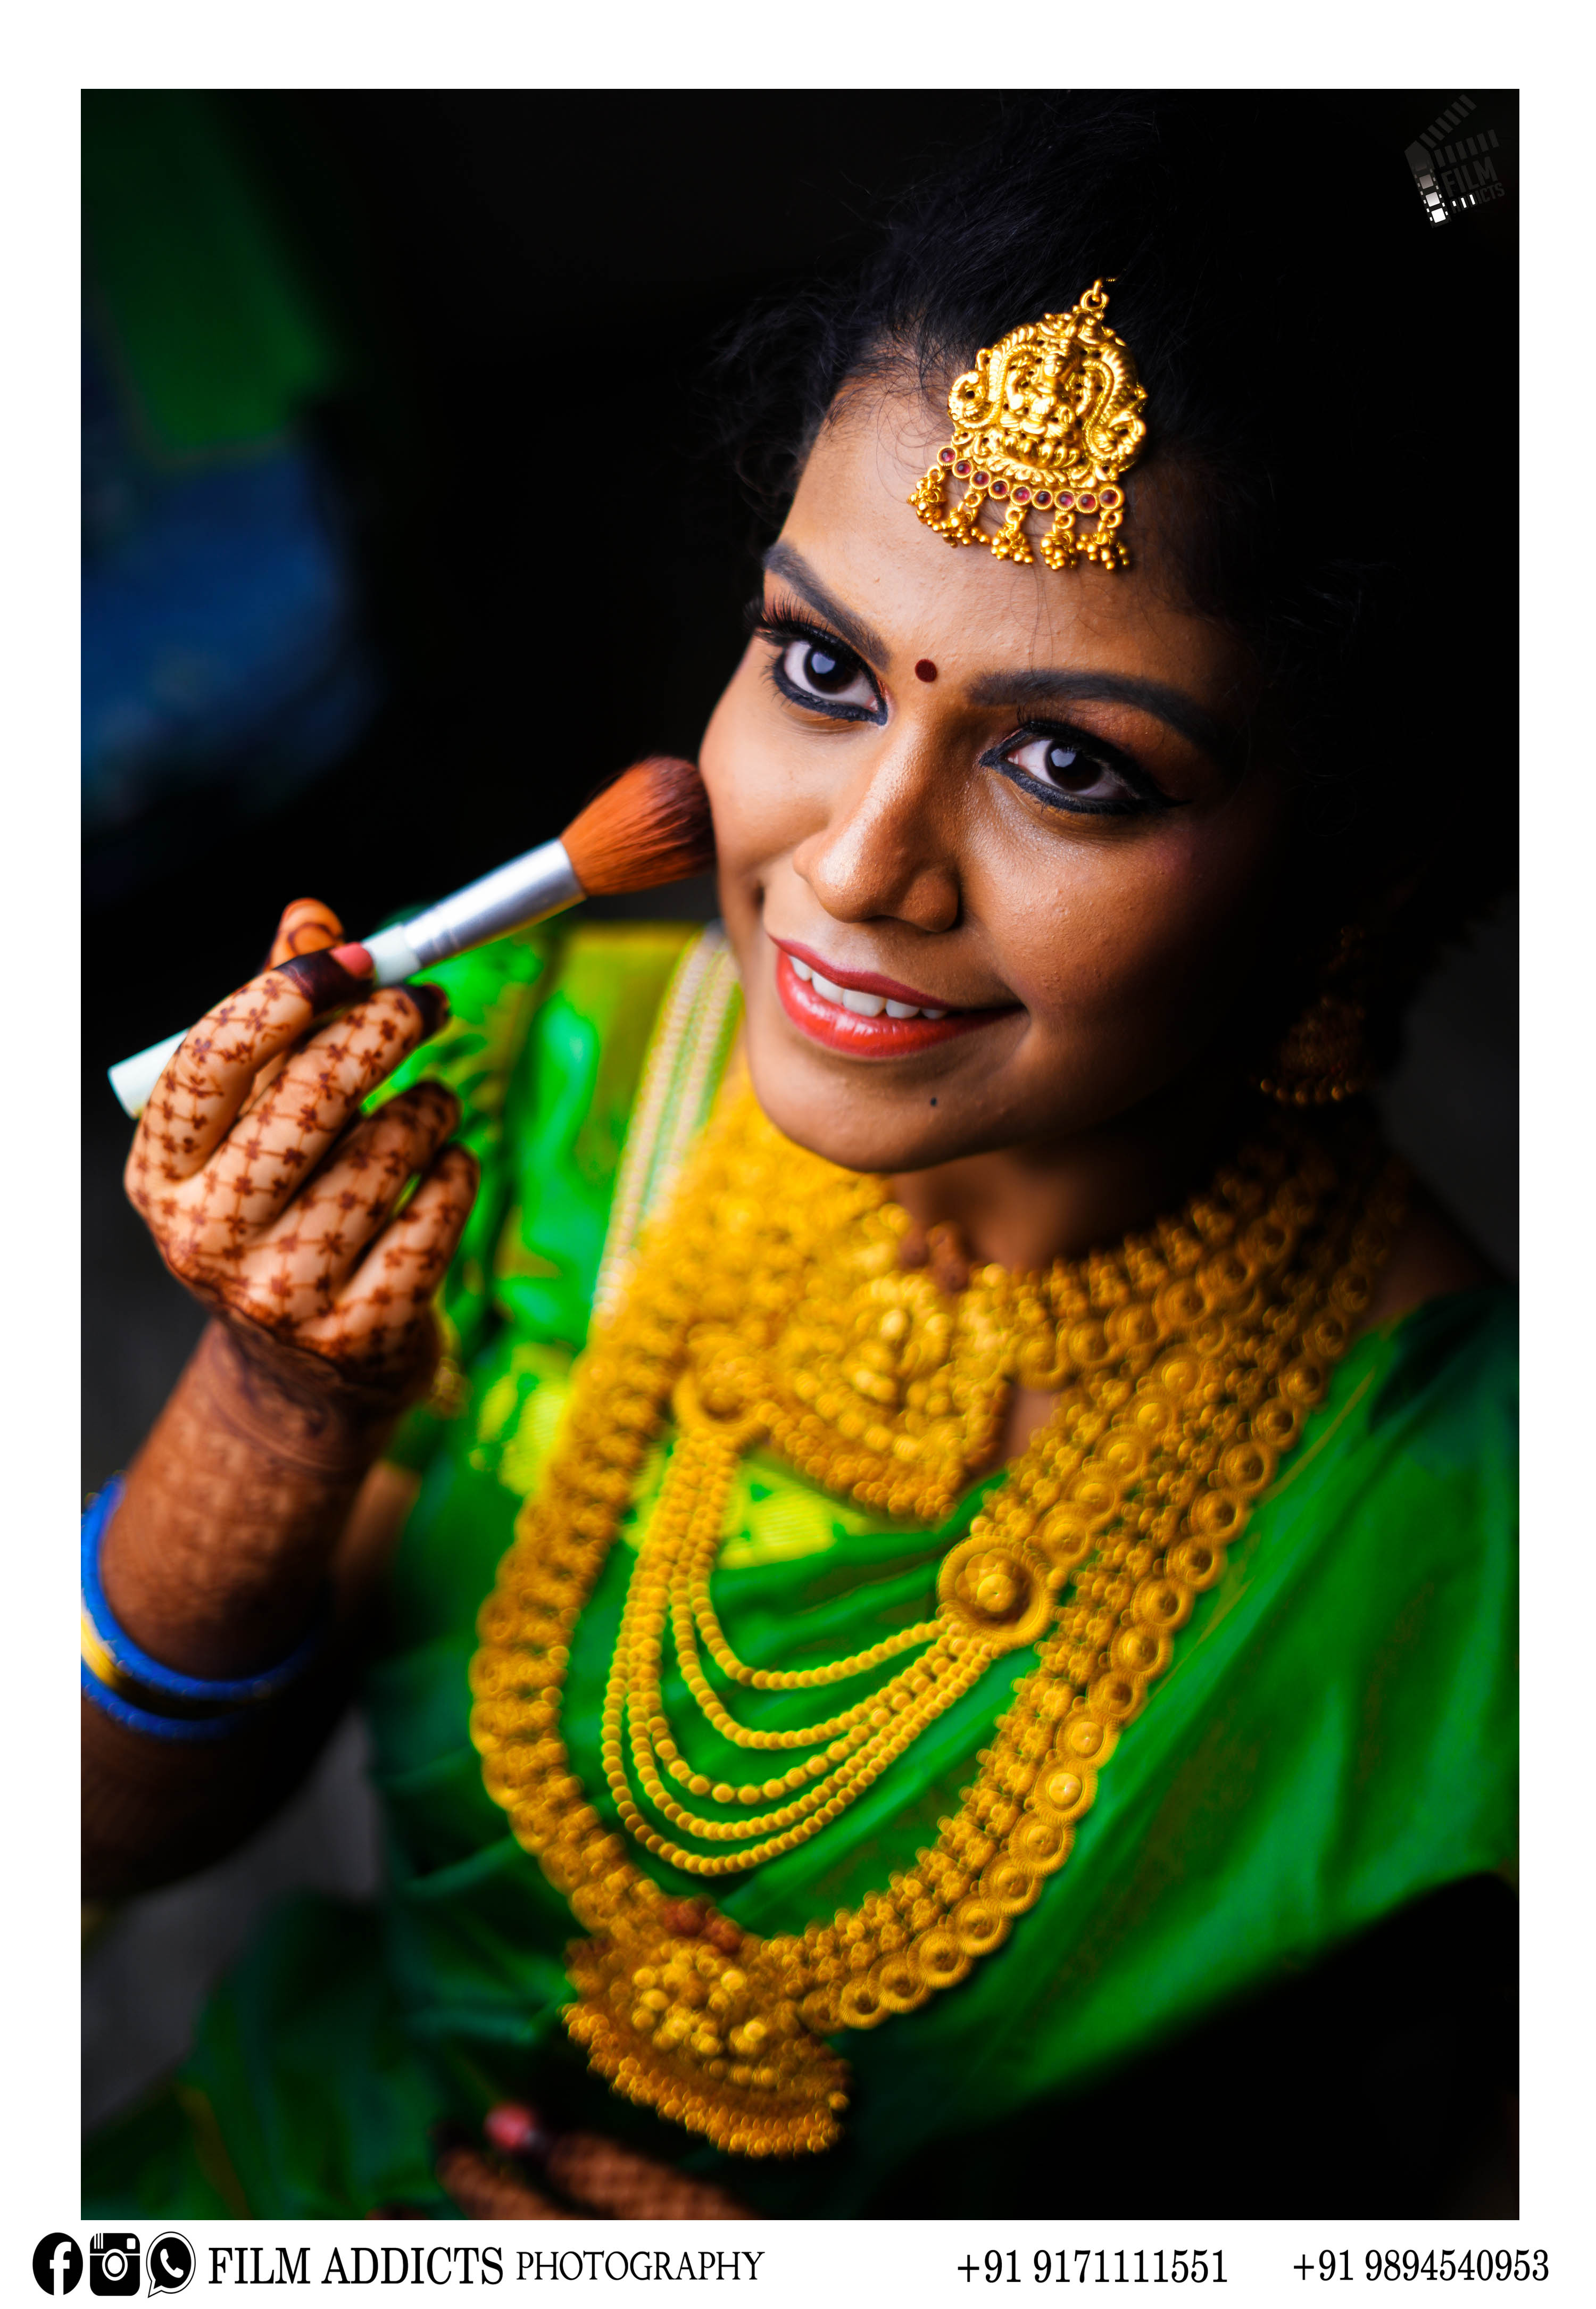 Best Puberty Photography in Trichy-FilmAddicts Photography,Best wedding photographers in Trichy,Best wedding photography in Trichy,Best candid photographers in Trichy,Best candid photography in Trichy,Best marriage photographers in Trichy,Best marriage photography in Trichy,Best photographers in Trichy,Best photography in Trichy,Best wedding candid photography in Trichy,Best wedding candid photographers in Trichy,Best wedding video in Trichy,Best wedding videographers in Trichy,Best wedding videography in Trichy,Best candid videographers in Trichy,Best candid videography in Trichy,Best marriage videographers in Trichy,Best marriage videography in Trichy,Best videographers in Trichy,Best videography in Trichy,Best wedding candid videography in Trichy,Best wedding candid videographers in Trichy,Best helicam operators in Trichy,Best drone operators in Trichy,Best wedding studio in Trichy,Best professional photographers in Trichy,Best professional photography in Trichy,No.1 wedding photographers in Trichy,No.1 wedding photography in Trichy,Trichy wedding photographers,Trichy wedding photography,Trichy wedding videos,Best candid videos in Trichy,Best candid photos in Trichy,Best helicam operators photography in Trichy,Best helicam operator photographers in Trichy,Best outdoor videography in Trichy,Best professional wedding photography in Trichy,Best outdoor photography in Trichy,Best outdoor photographers in Trichy,Best drone operators photographers in Trichy,Best wedding candid videography in Trichy,tamilnadu wedding photography, tamilnadu.